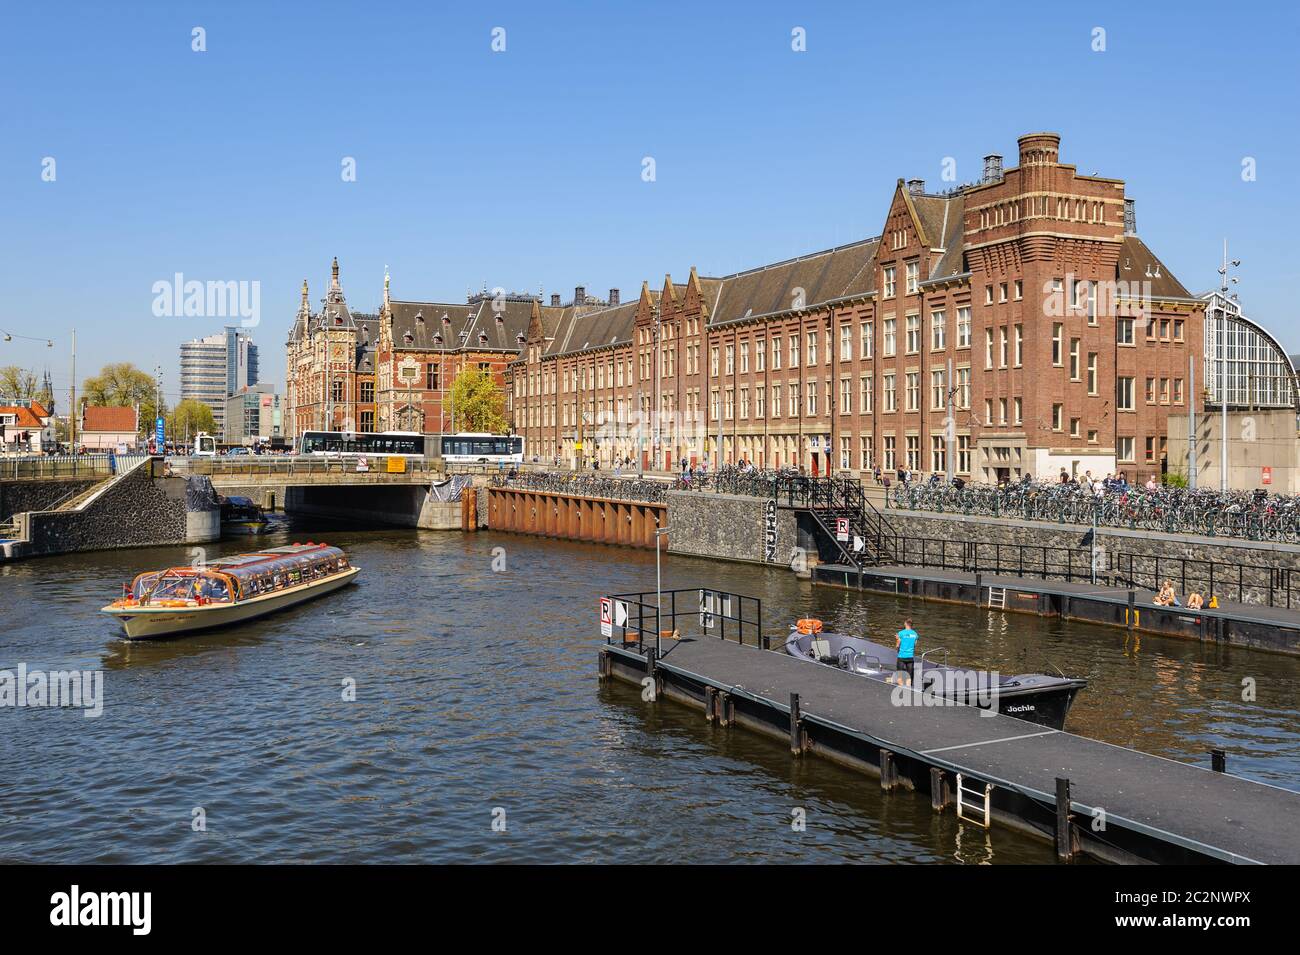 Sightseeng at Canal Boats near the Central Station of Amsterdam Stock Photo